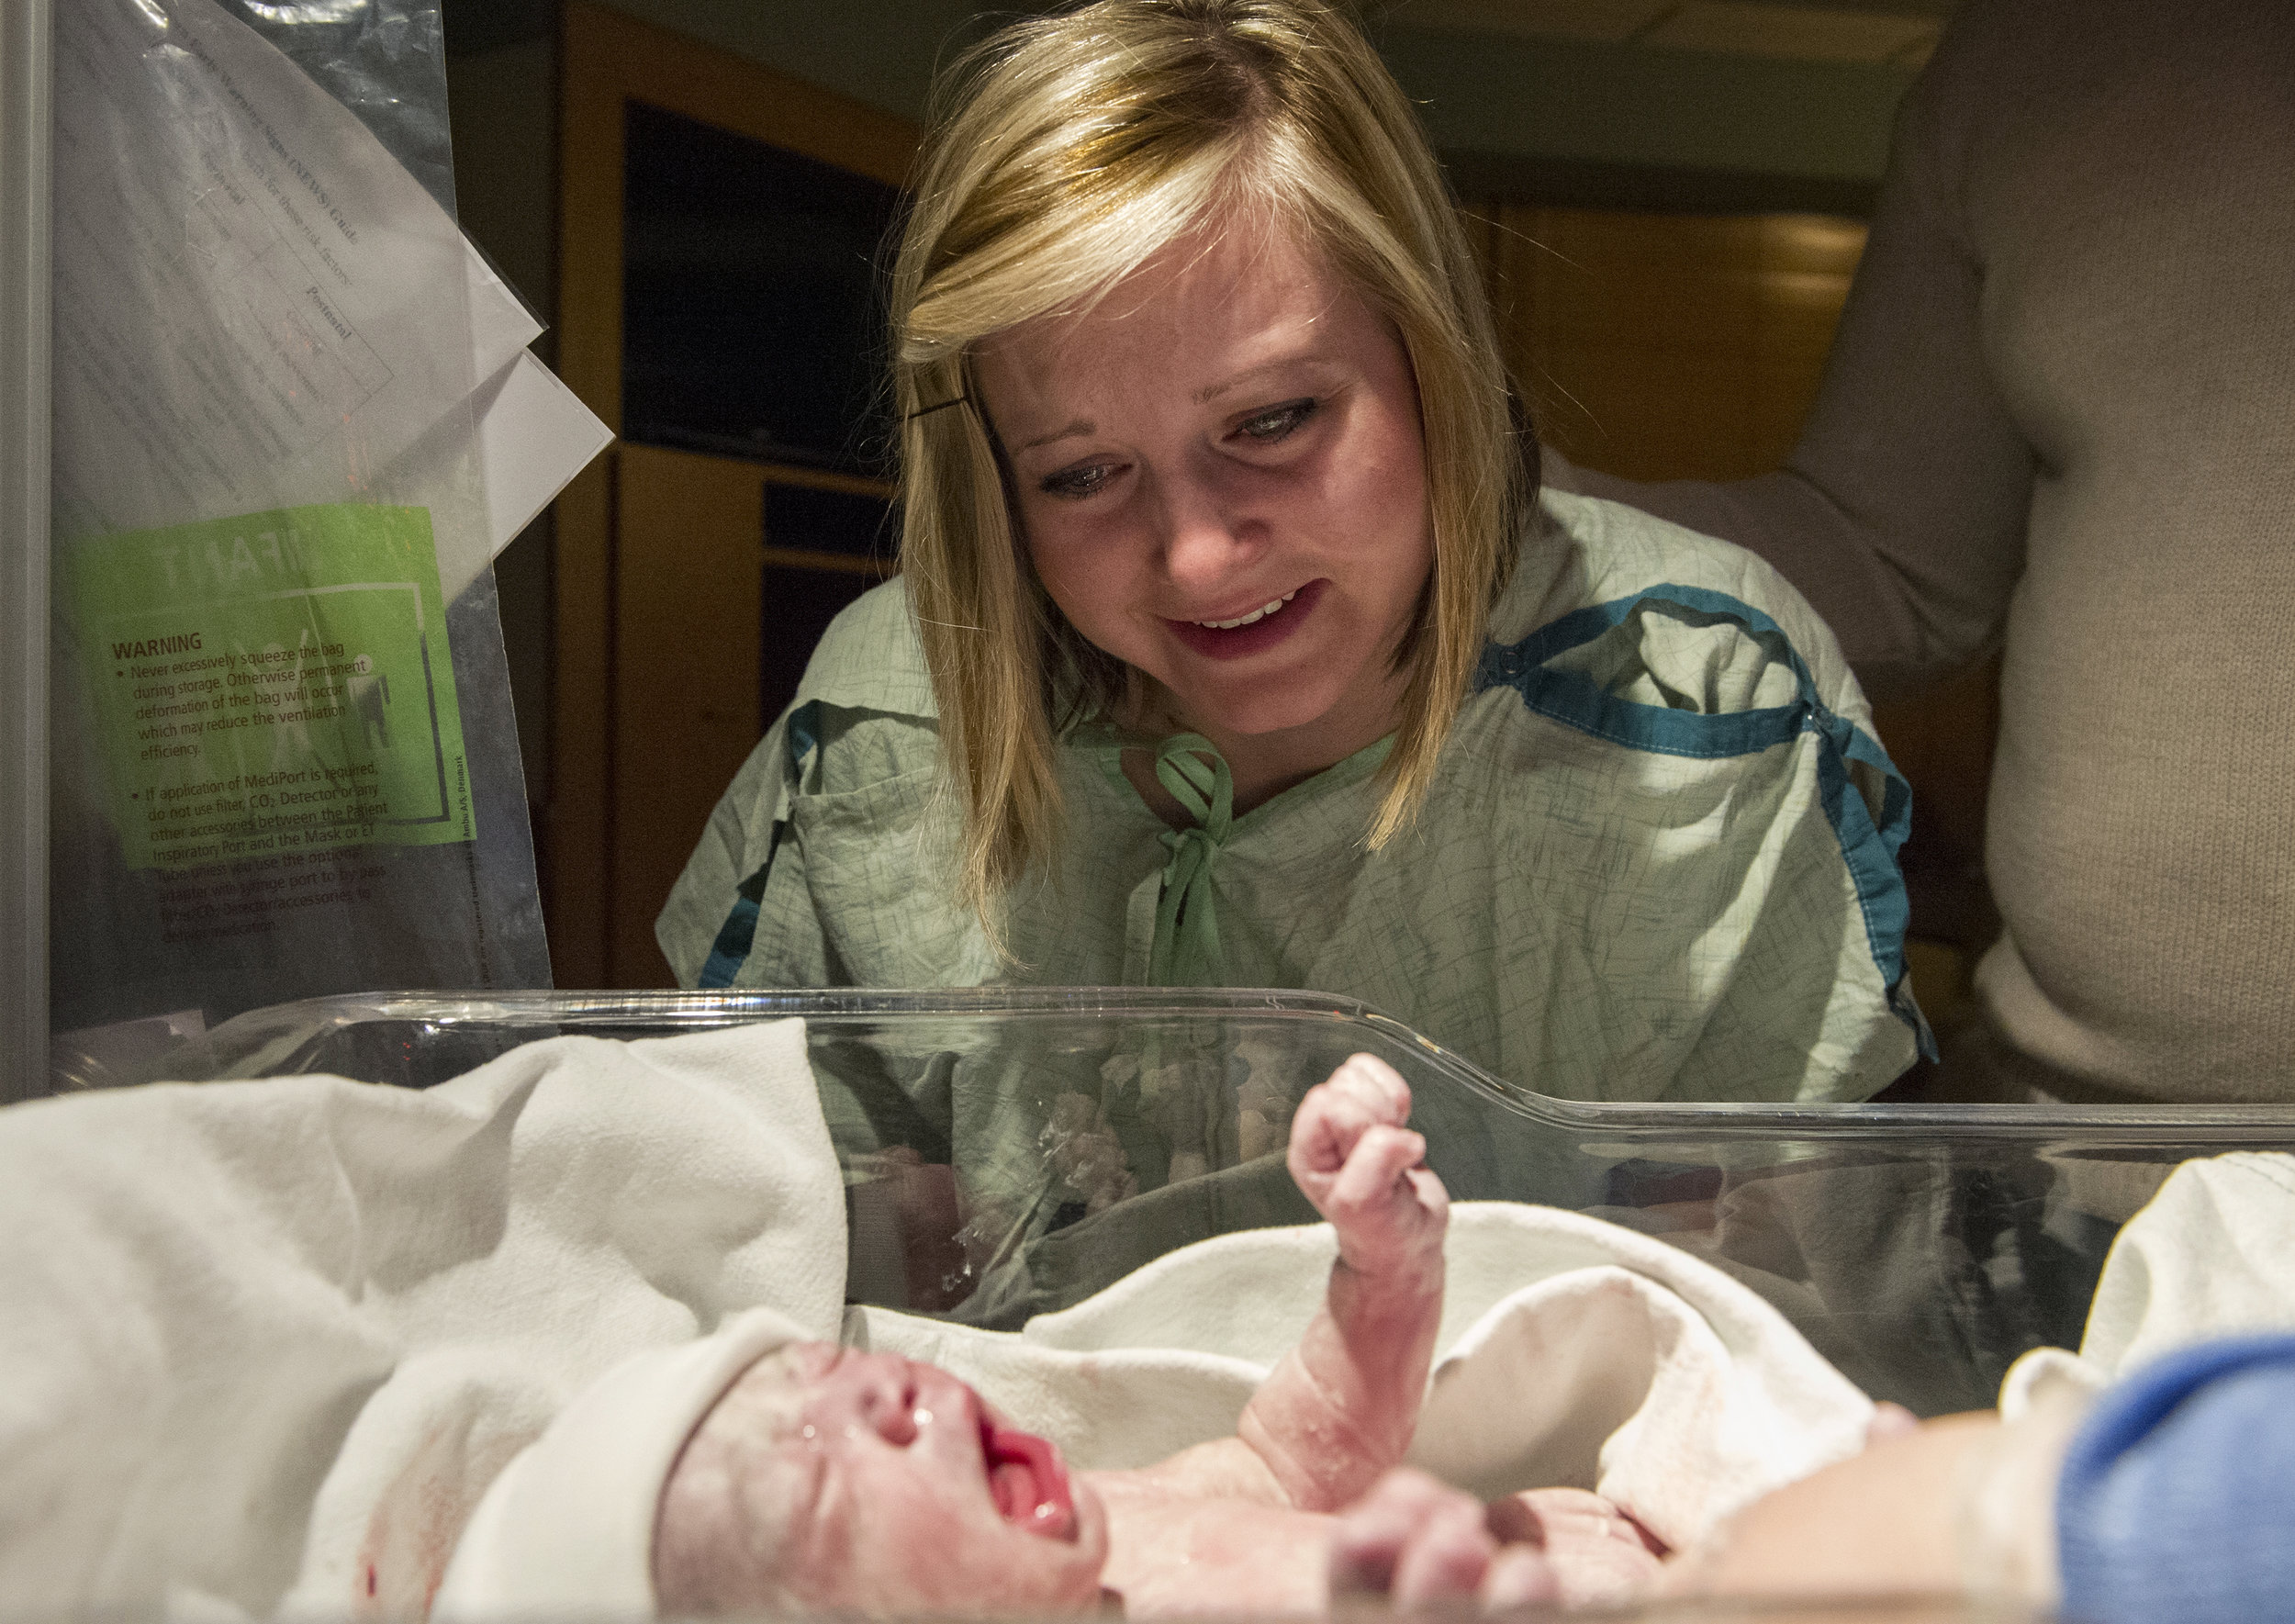  Erickia lays eyes on Gracelyn for the first time minutes after she is born and removed from the delivery room at St. Mary's Medical Center in Evansville Monday Dec. 1, 2014. "Before Gracelyn I lived in this state of constant heartache," Erickia said